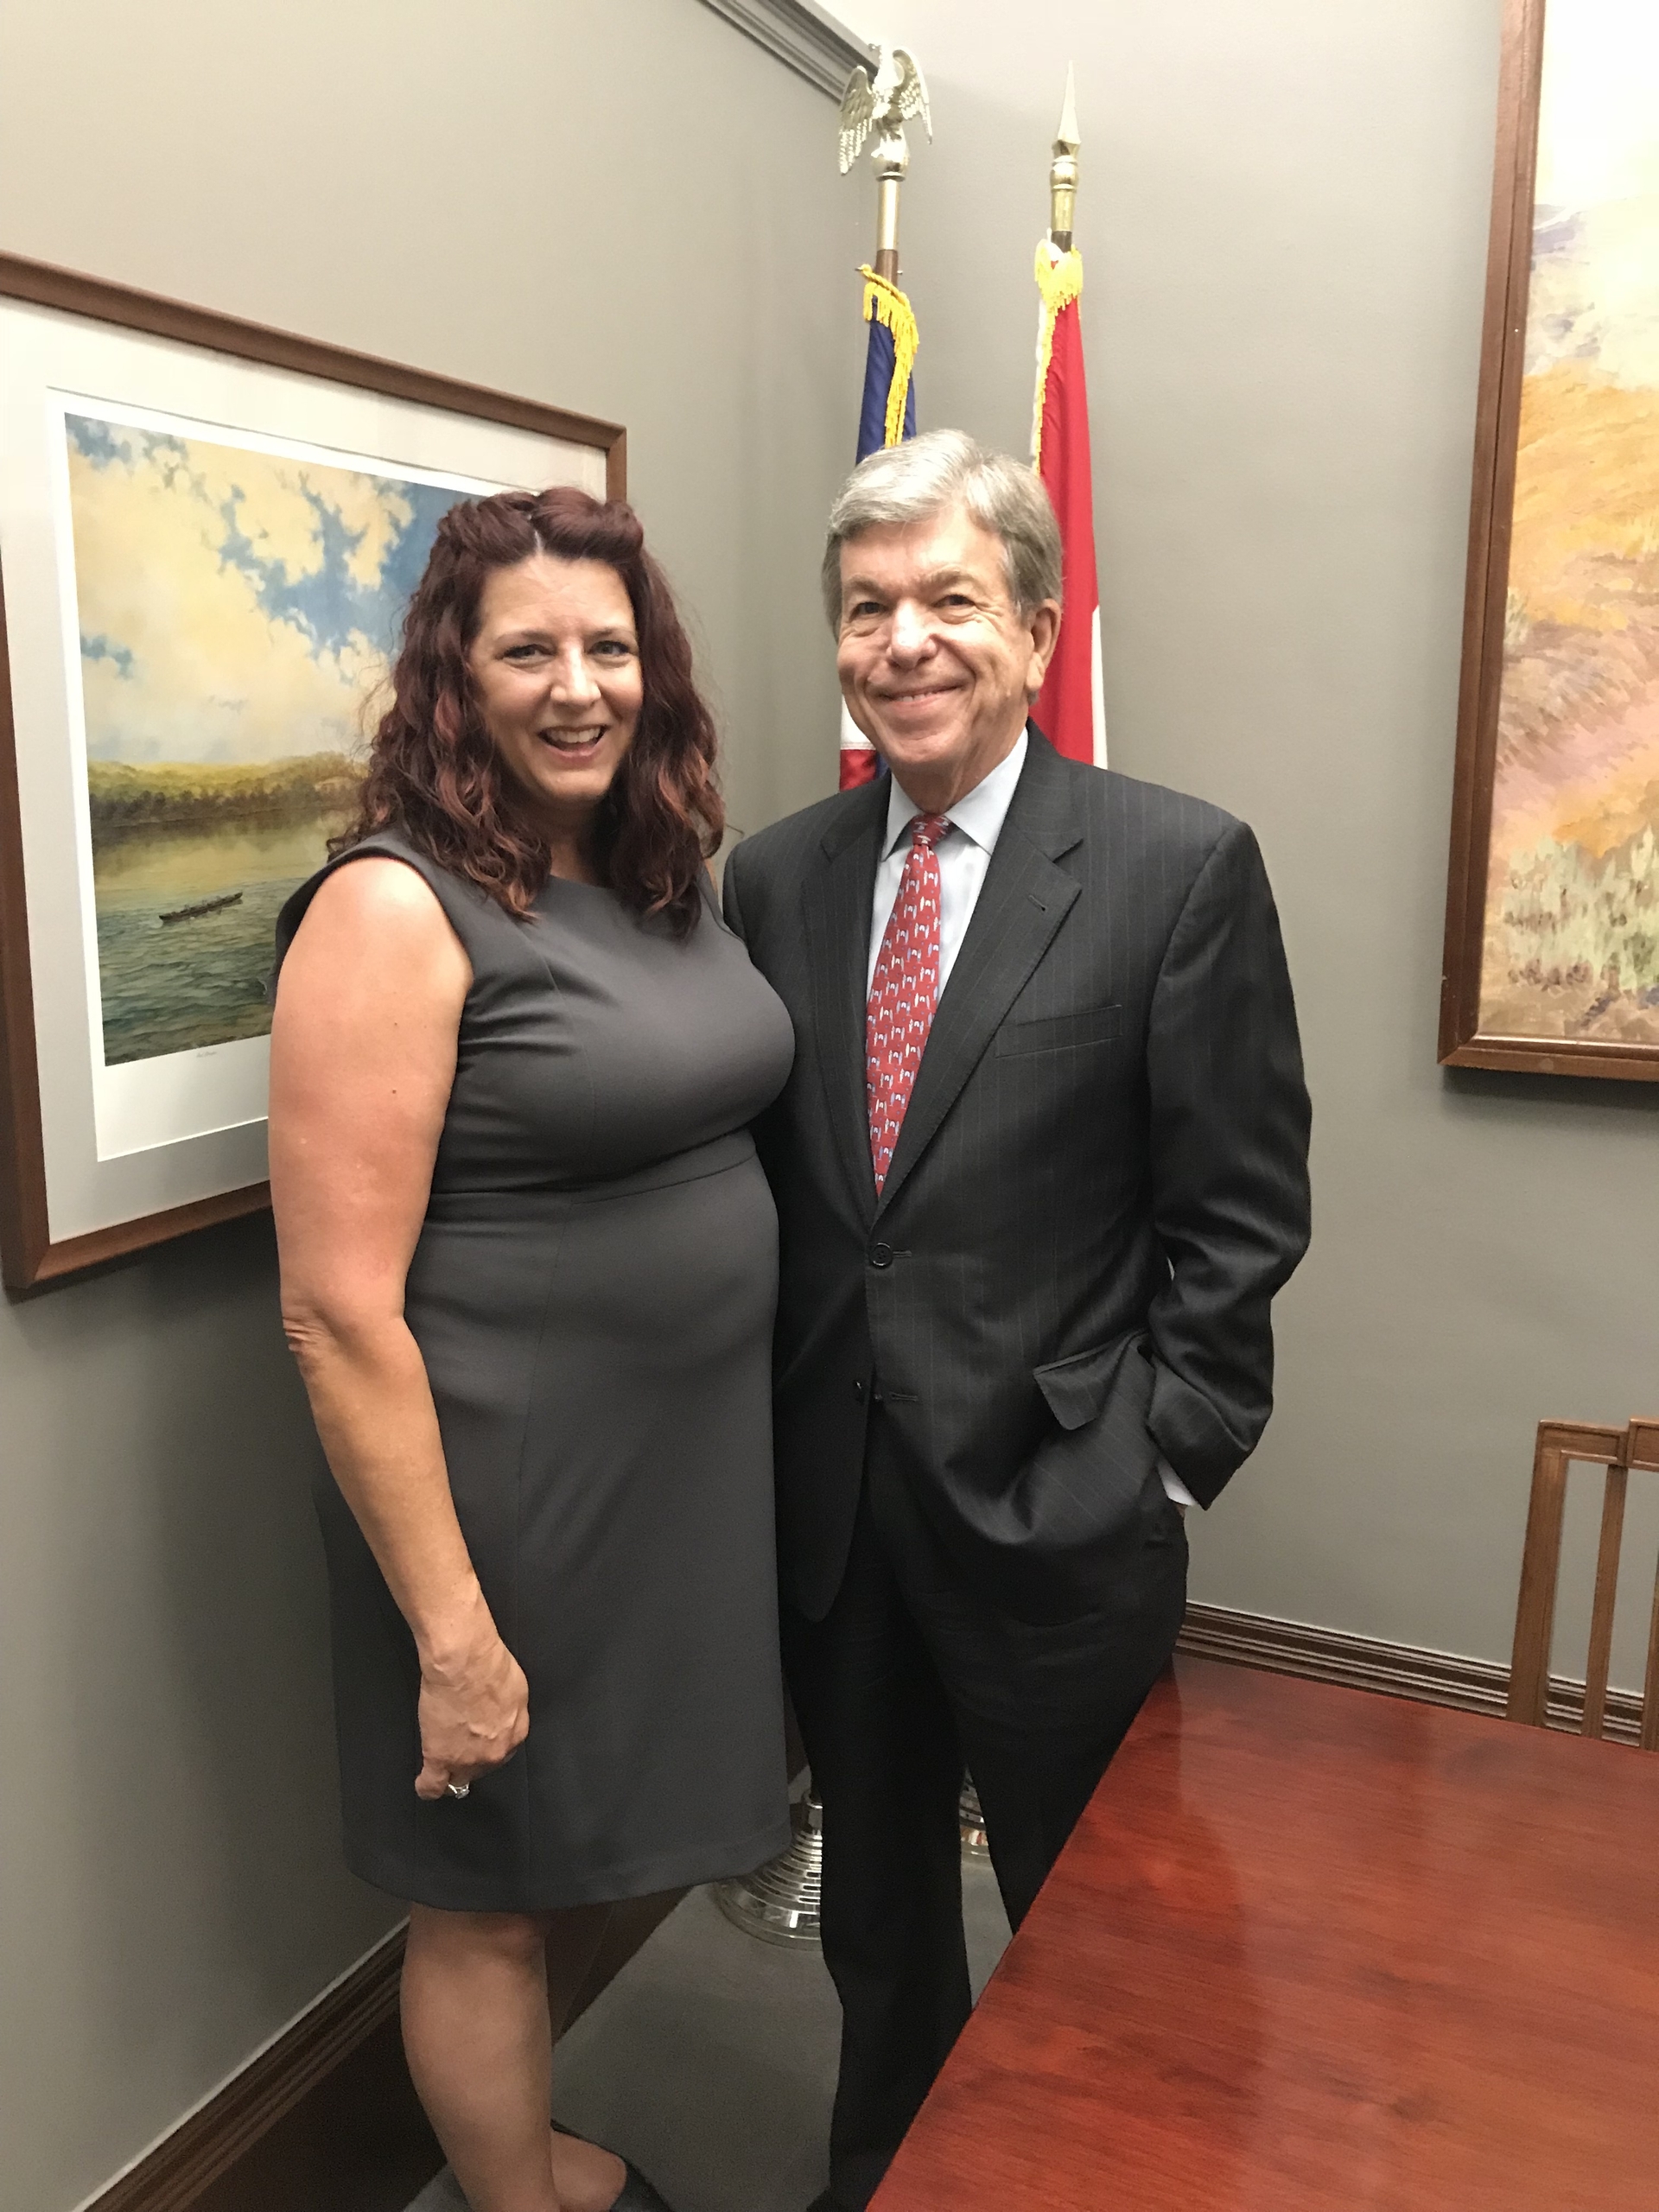 On the left, a female (Kindle Direct Publishing author, Denise Grover Swank) in a dark gray dress stands next to a man (Senator Roy Blunt) wearing a suit. 